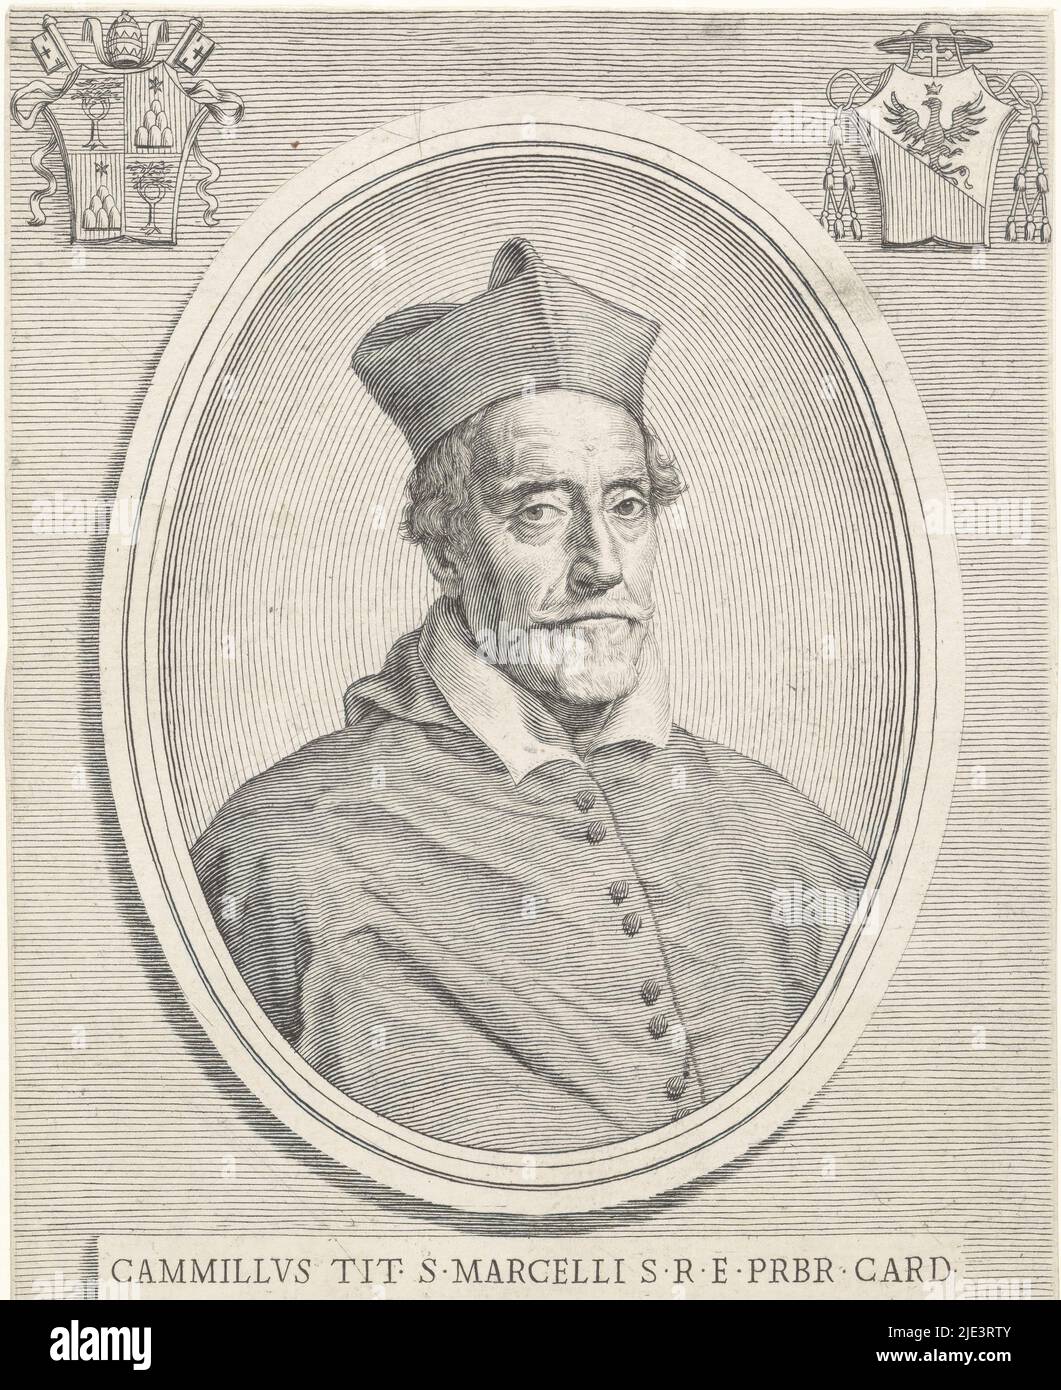 Top left and top right a coat of arms, Portrait of Cardinal Camillo Melzi Portraits of cardinals with two coats of arms  Effigies, print maker: Giuseppe Maria Testana, (mentioned on object), Giuseppe Maria Testana, (mentioned on object), publisher: Giovanni Giacomo de'Rossi, (mentioned on object), print maker: Italy, Italy, publisher: Rome, Vaticaanstad, 1658 - 1679, paper, engraving, h 190 mm - w 137 mm Stock Photo